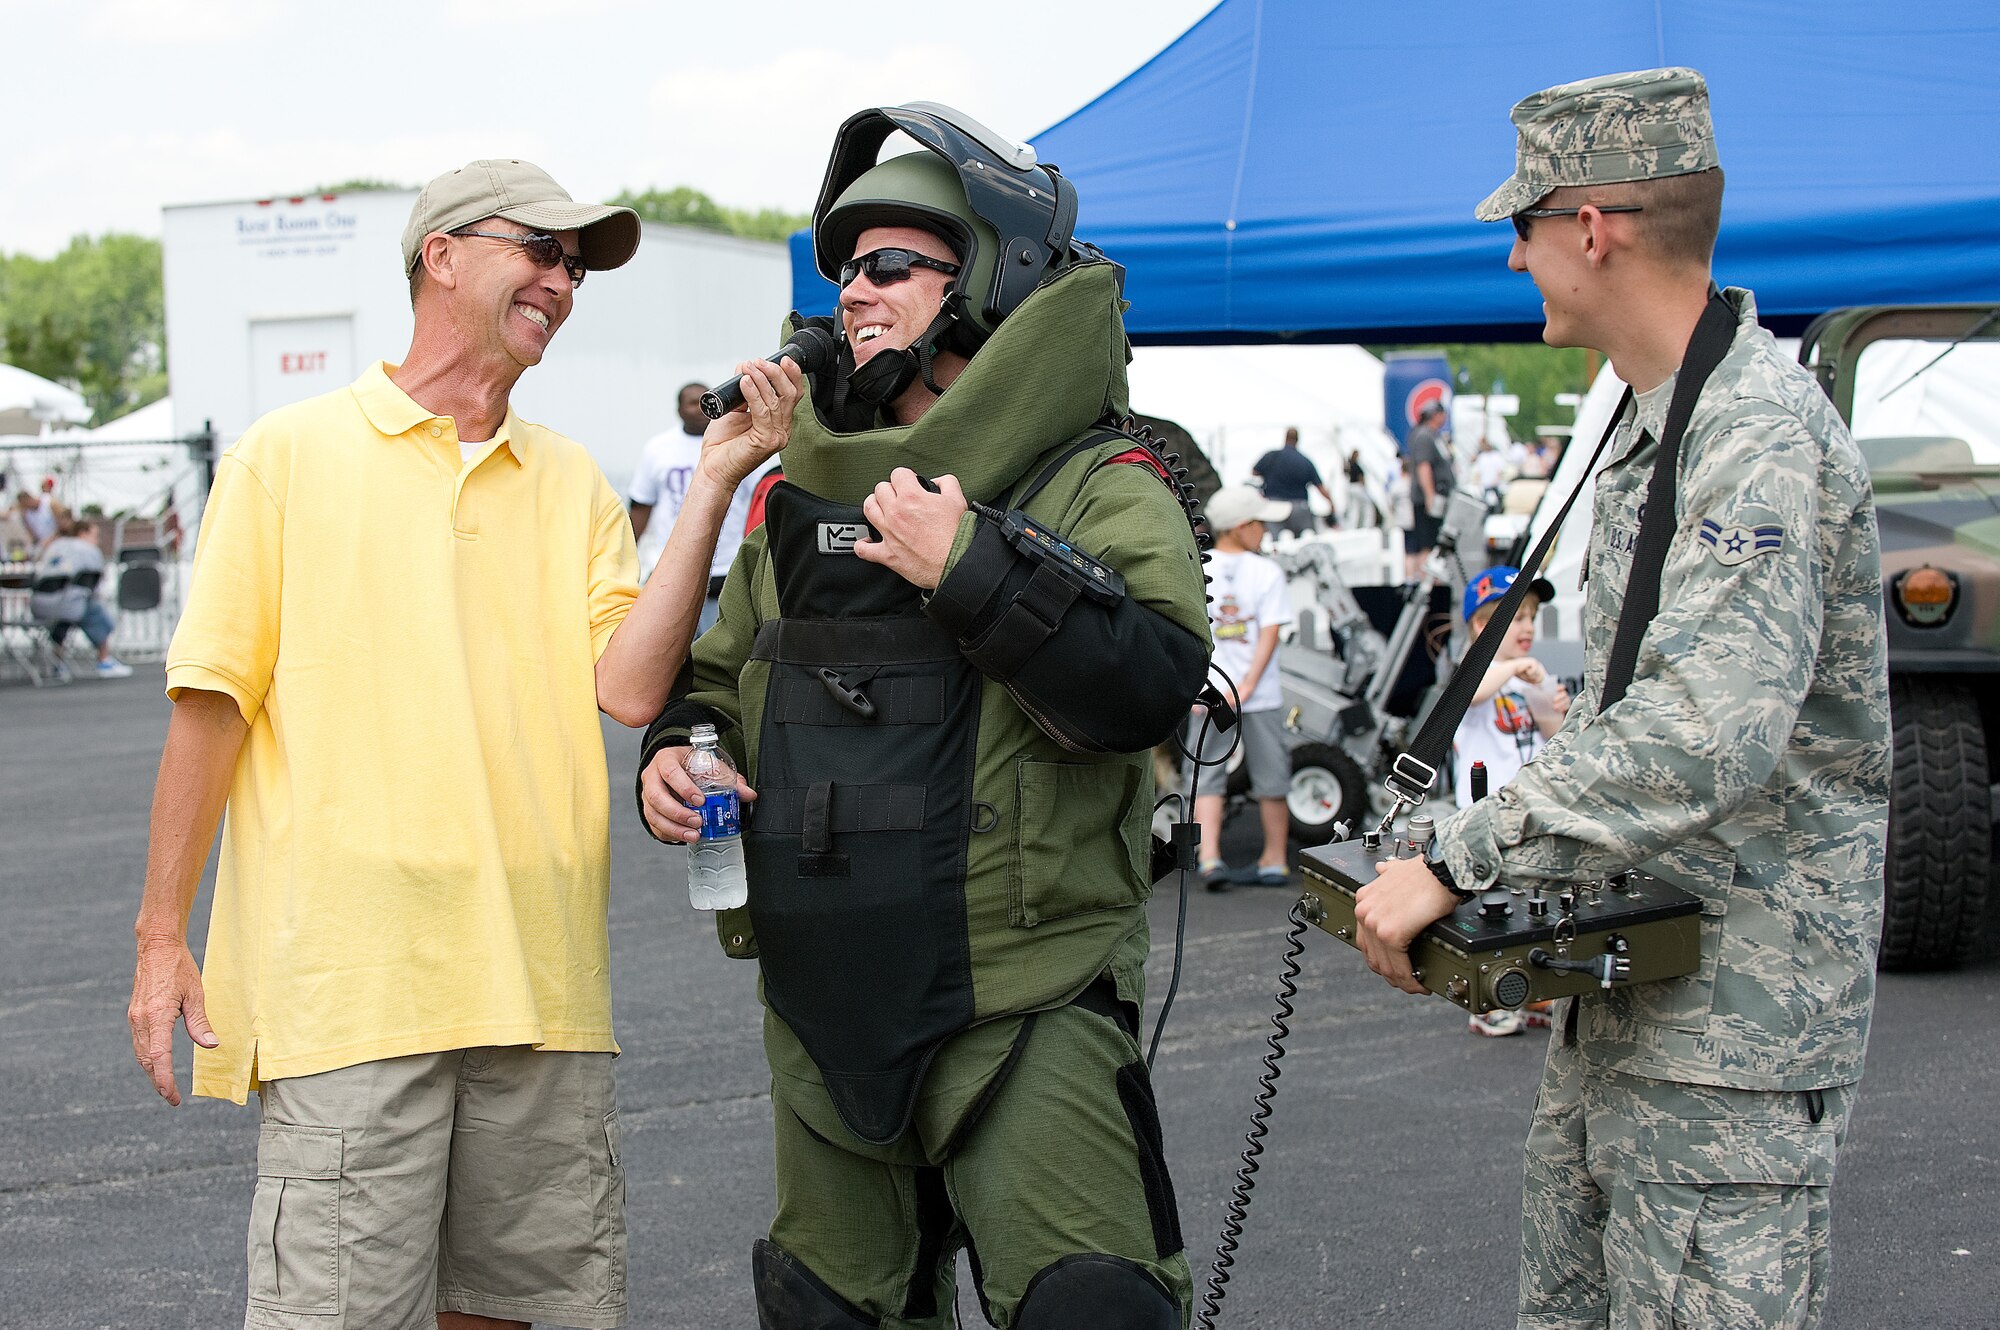 436th Airlift Wing Explosive Ordinance Disposal members (middle) Capt. Patrick Wren and (right) Airman 1st Class Benjamin McGovern are interviewed by an announcer at Dover Downs before the Heluva Good! 200 NASCAR race May 30.  (U.S. Air Force photo/Jason Minto)